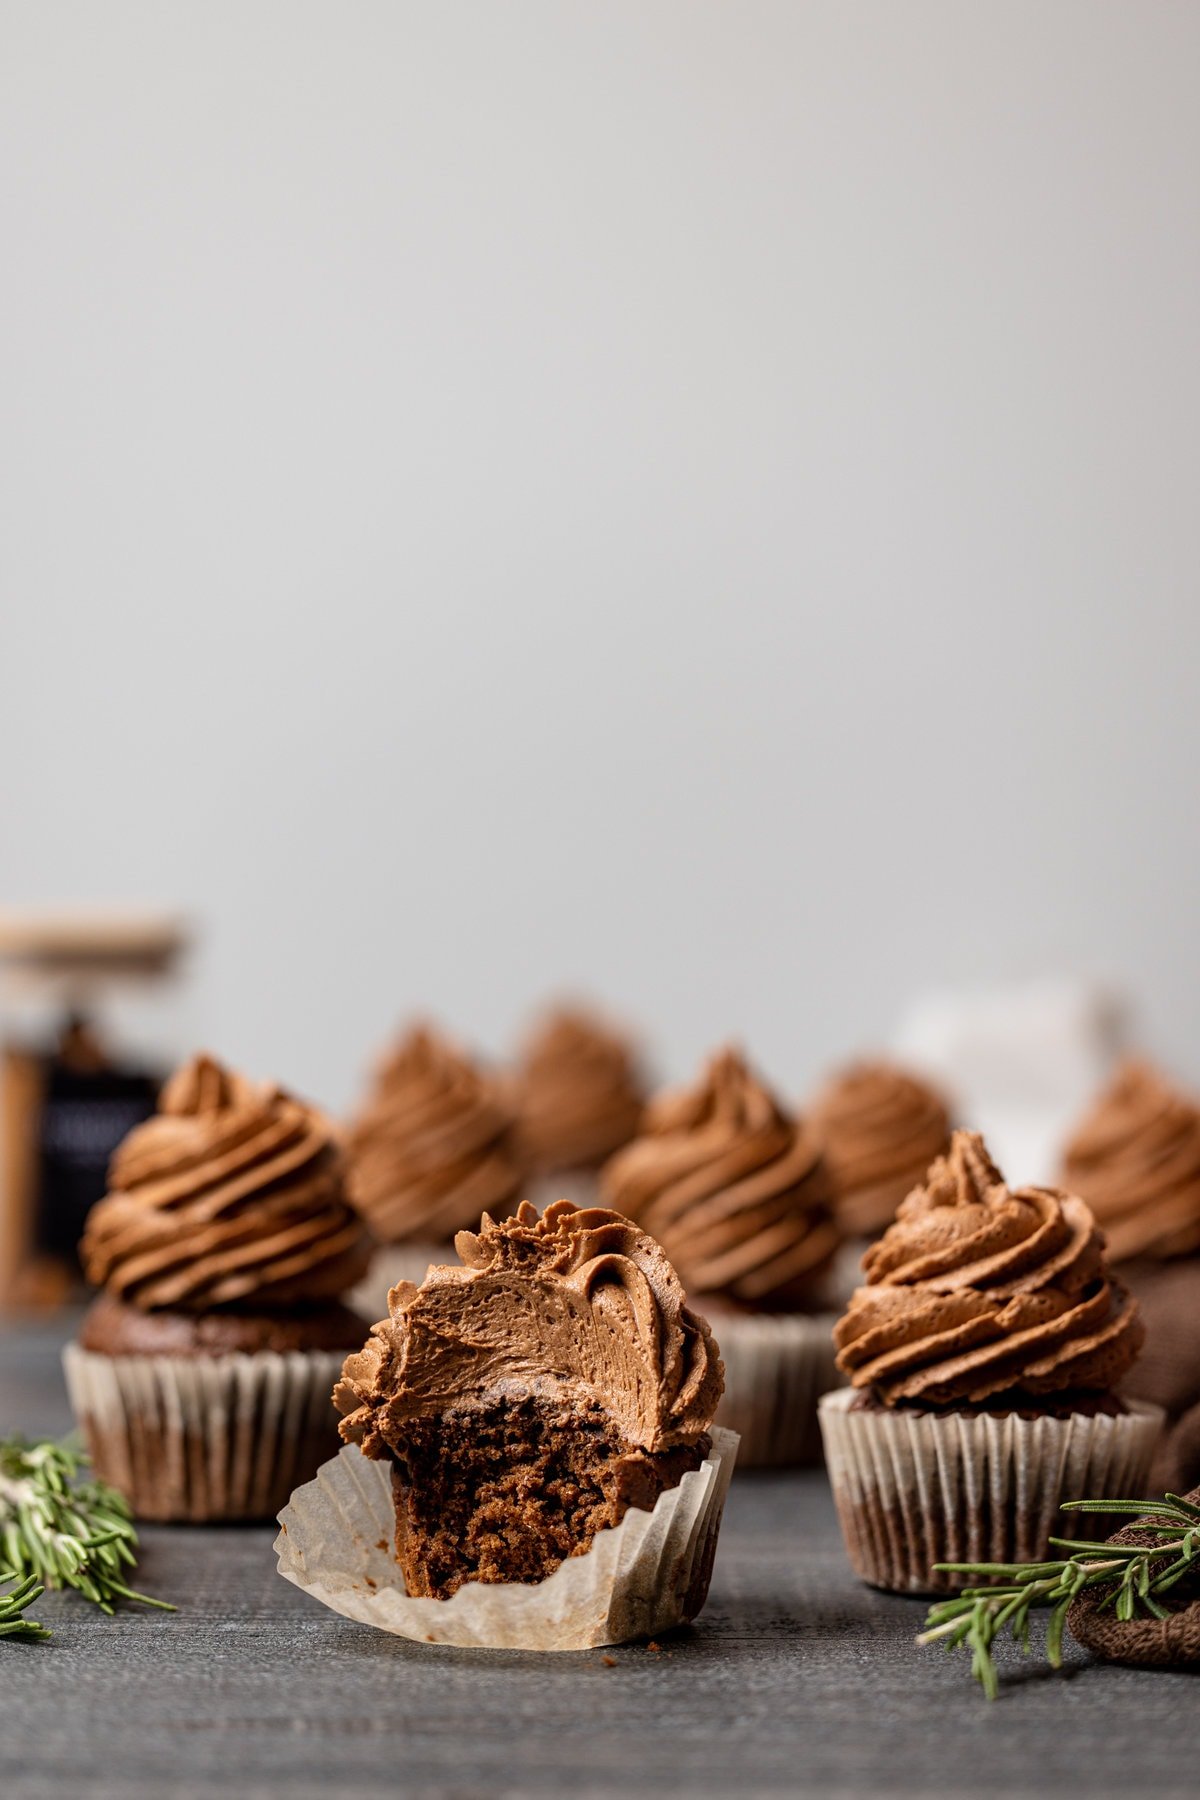 Group of Chocolate Sweet Potato Cupcakes, one of which is missing a bite